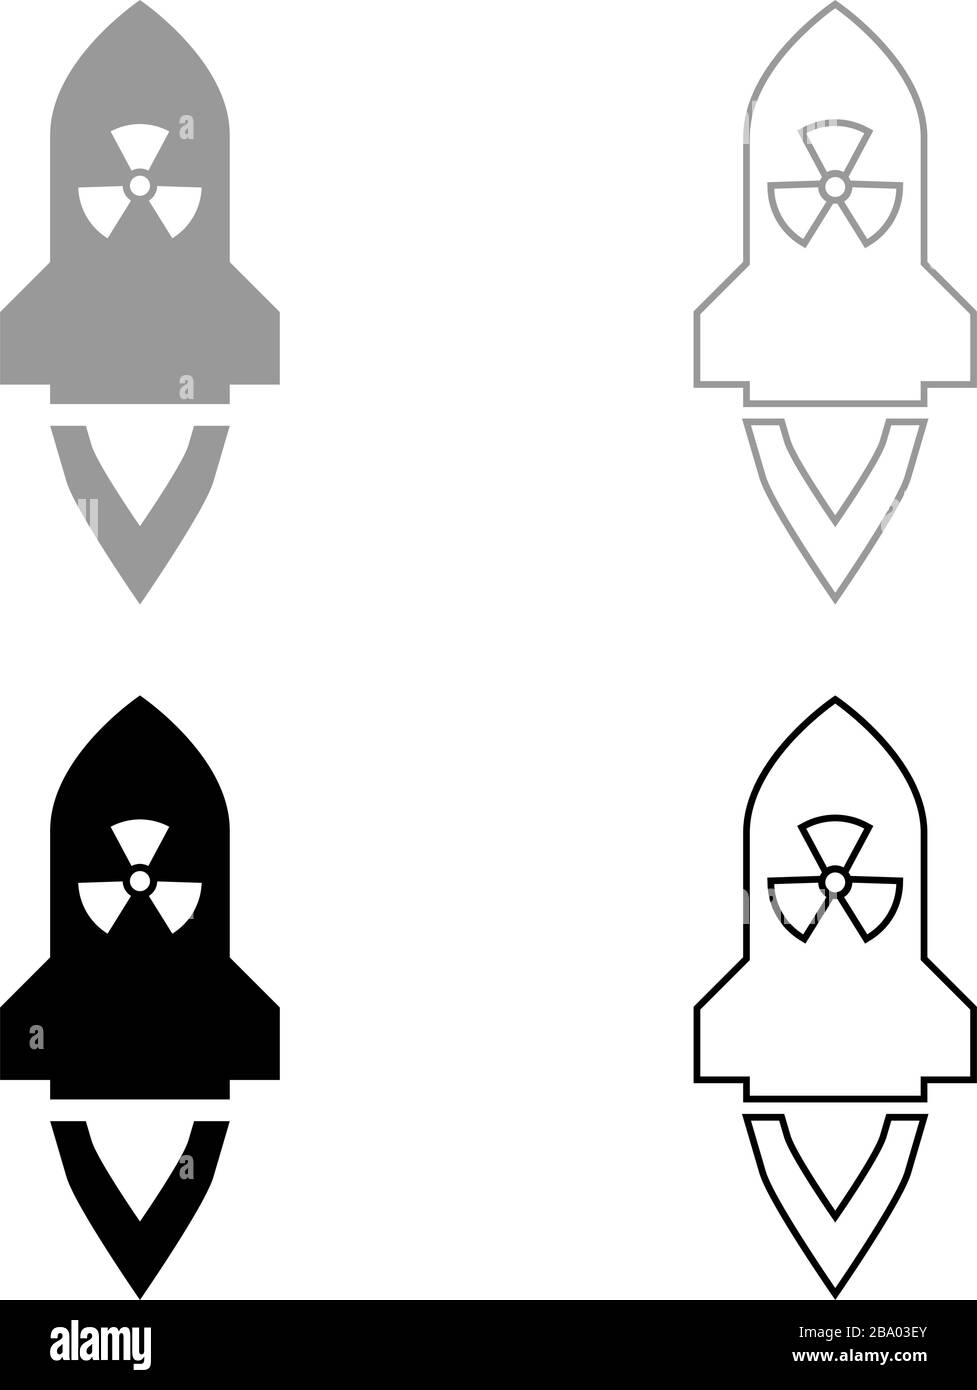 Atomic rocket flying Nuclear missile weapons Radioactive bomb Military concept icon outline set black grey color vector illustration flat style Stock Vector